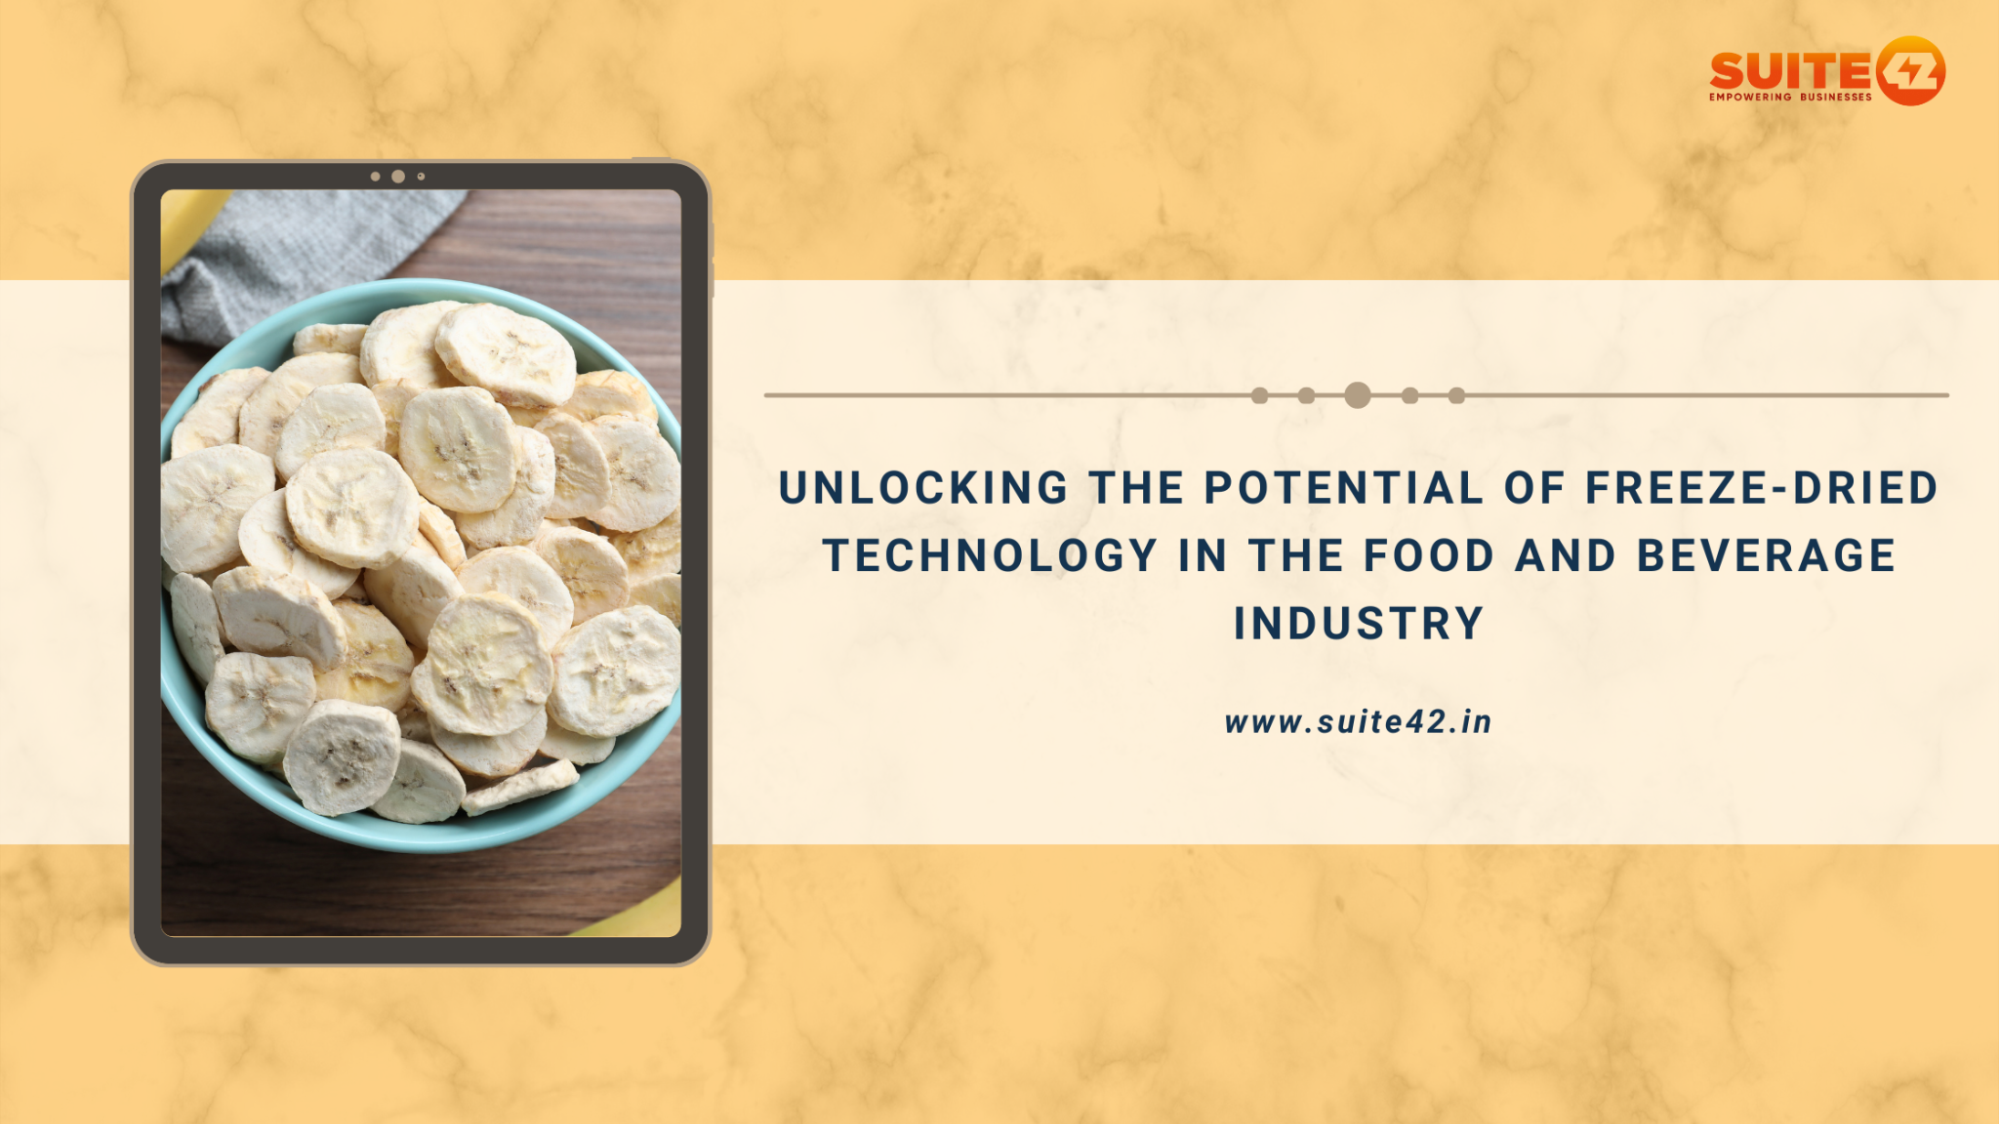 A guide to Freee-Dried Technology in the Food and Beverage Industry